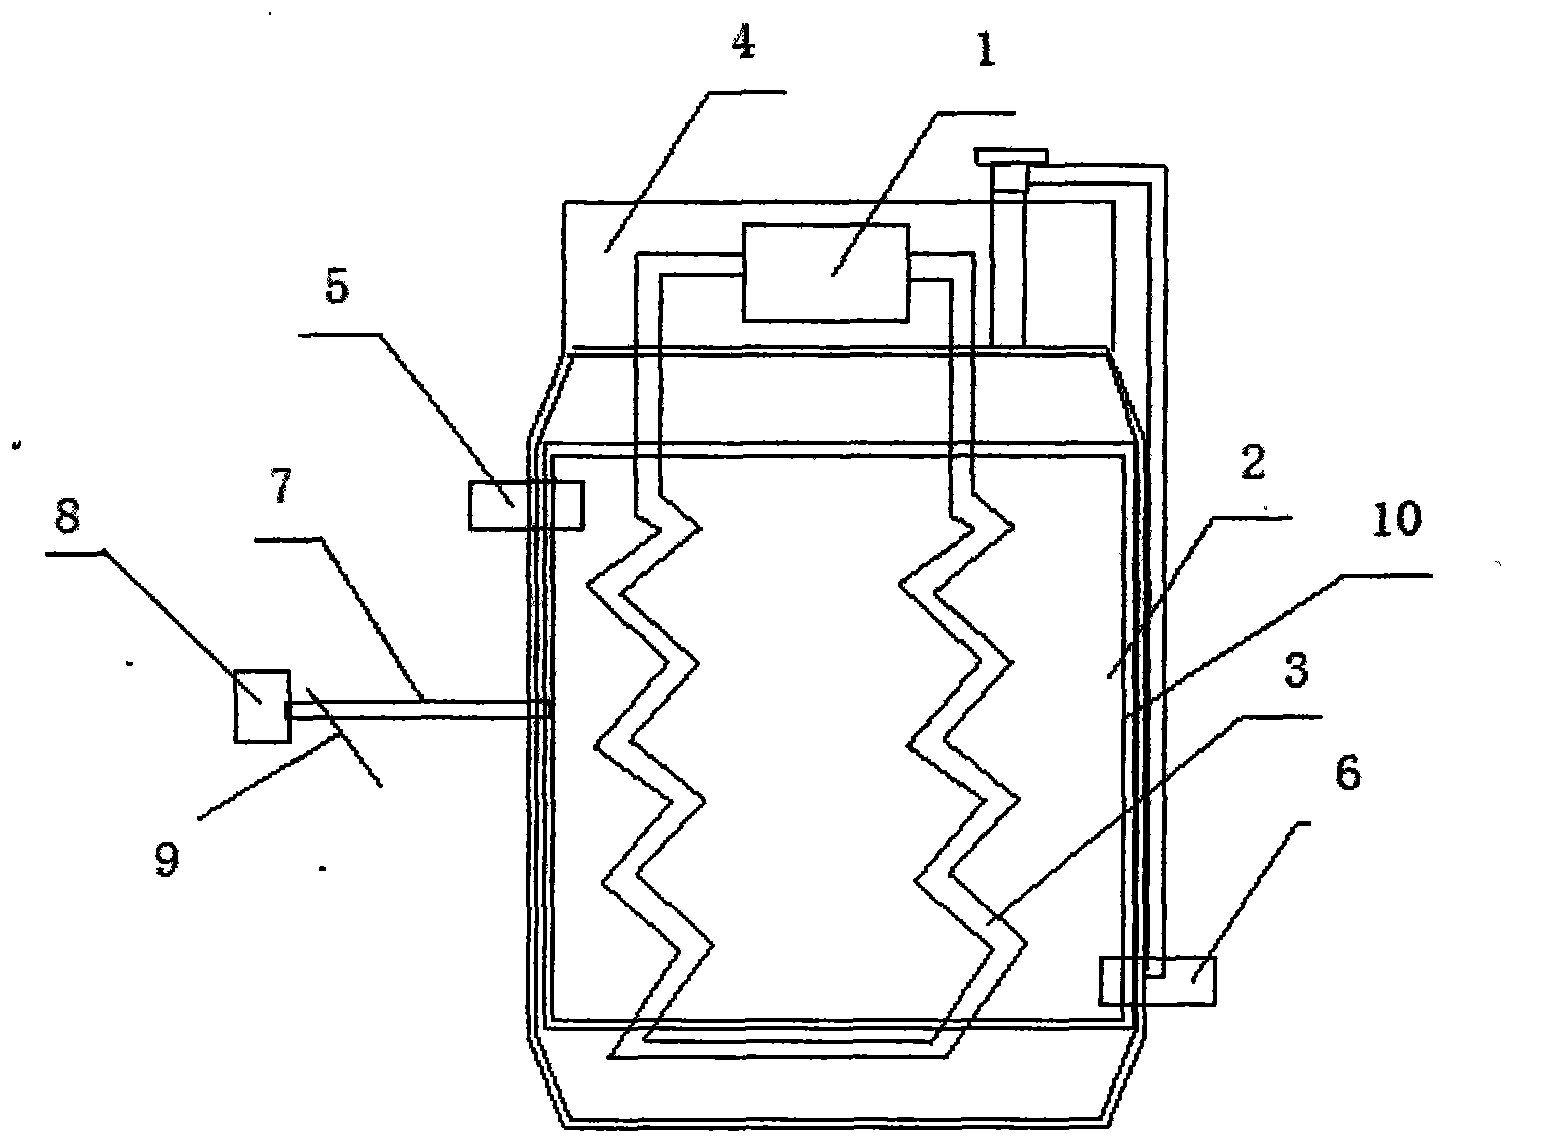 Heat dissipation device for hydraulic system